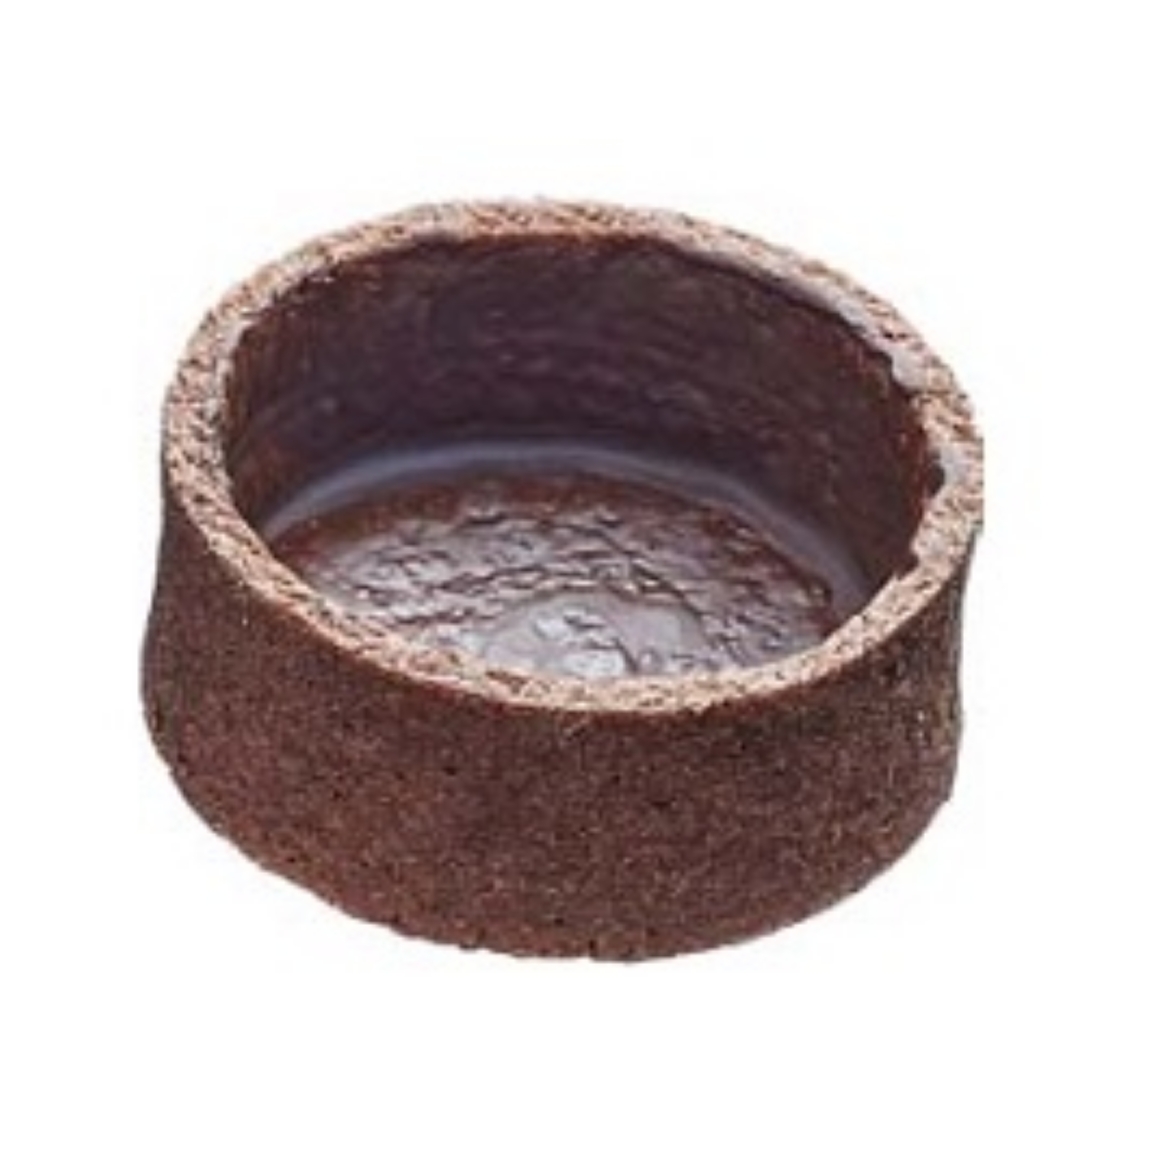 Picture of 125s LRN CHOCOLATE TART SHELLS SMALL 48mm (C2RD125)